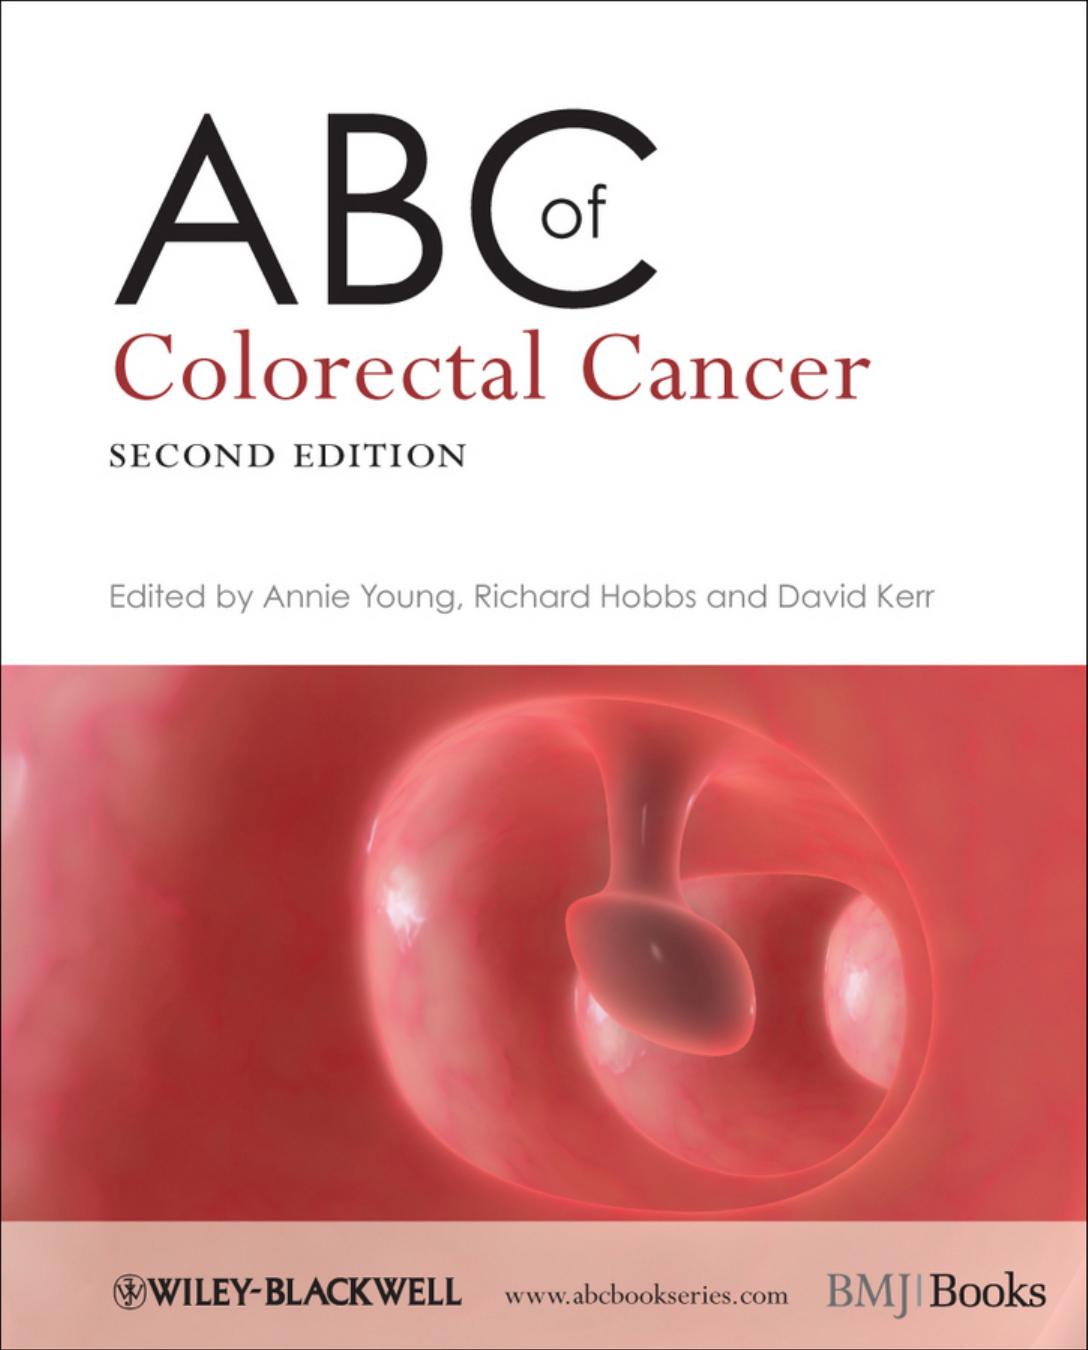 ABC of Colorectal Cancer,2nd Edition.jpg